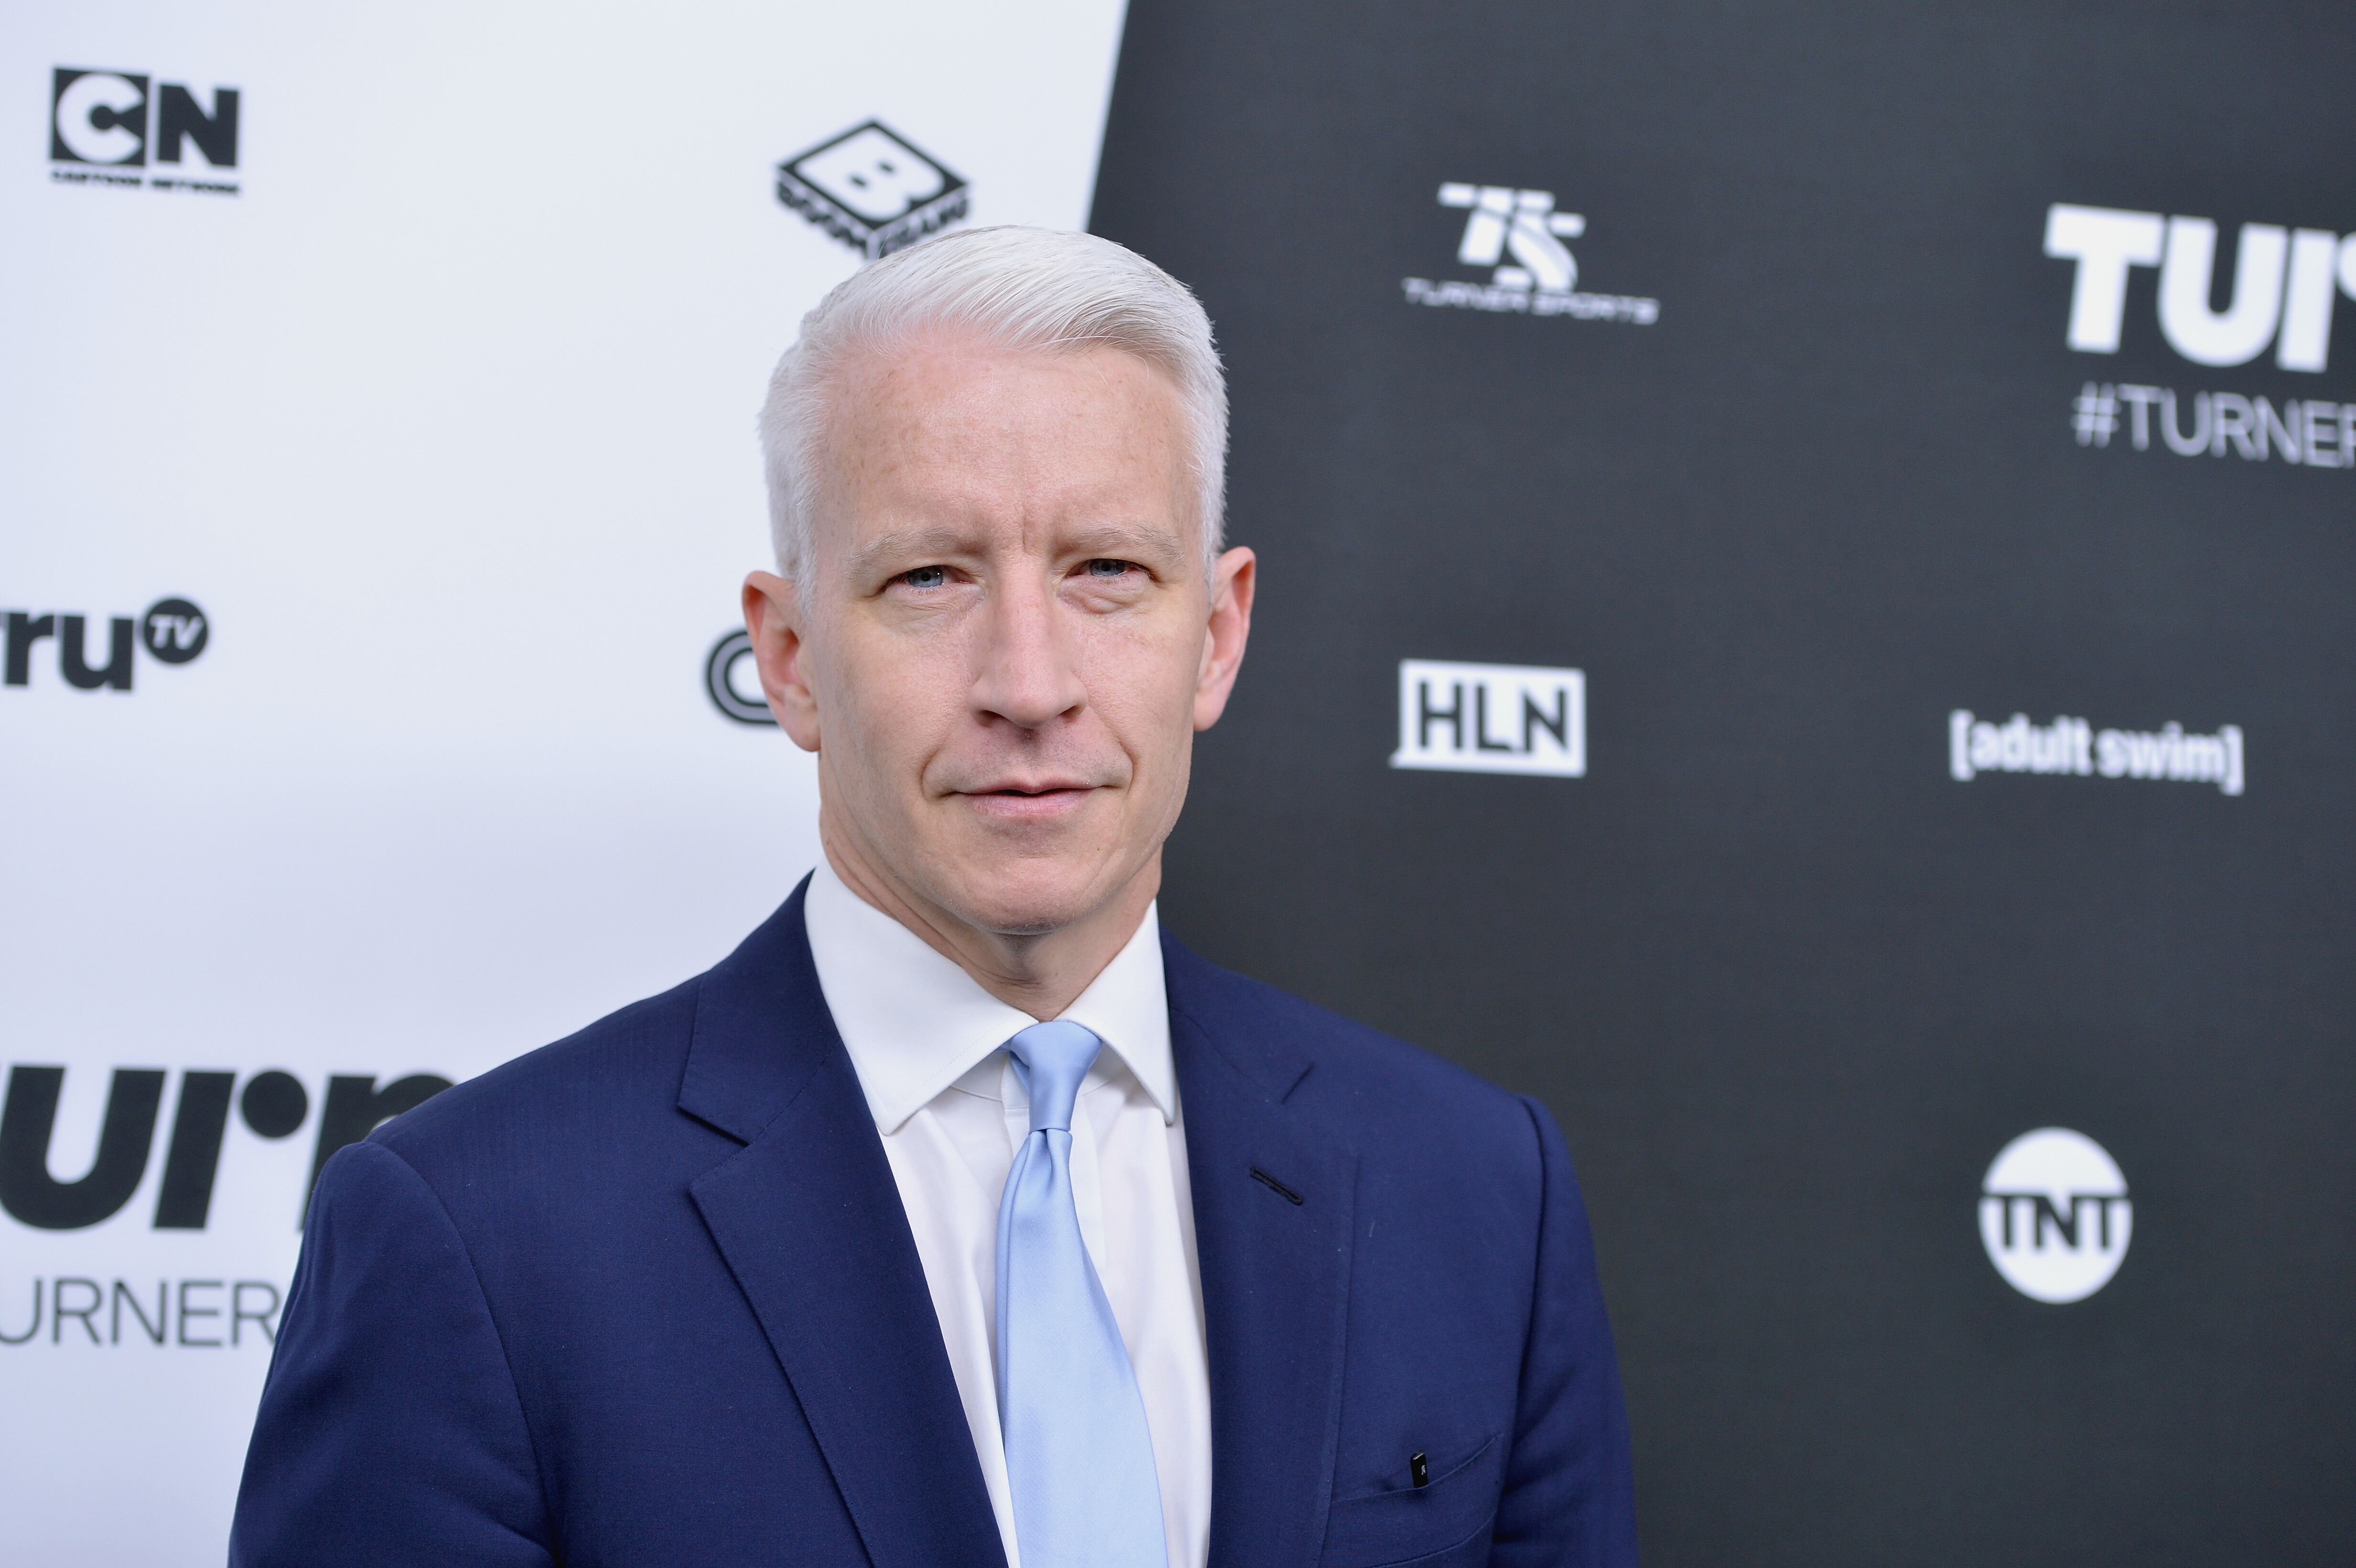 Anderson Cooper at the Turner Upfront held at Nick & Stef's Steakhouse on May 18, 2016. | Photo: Getty Images